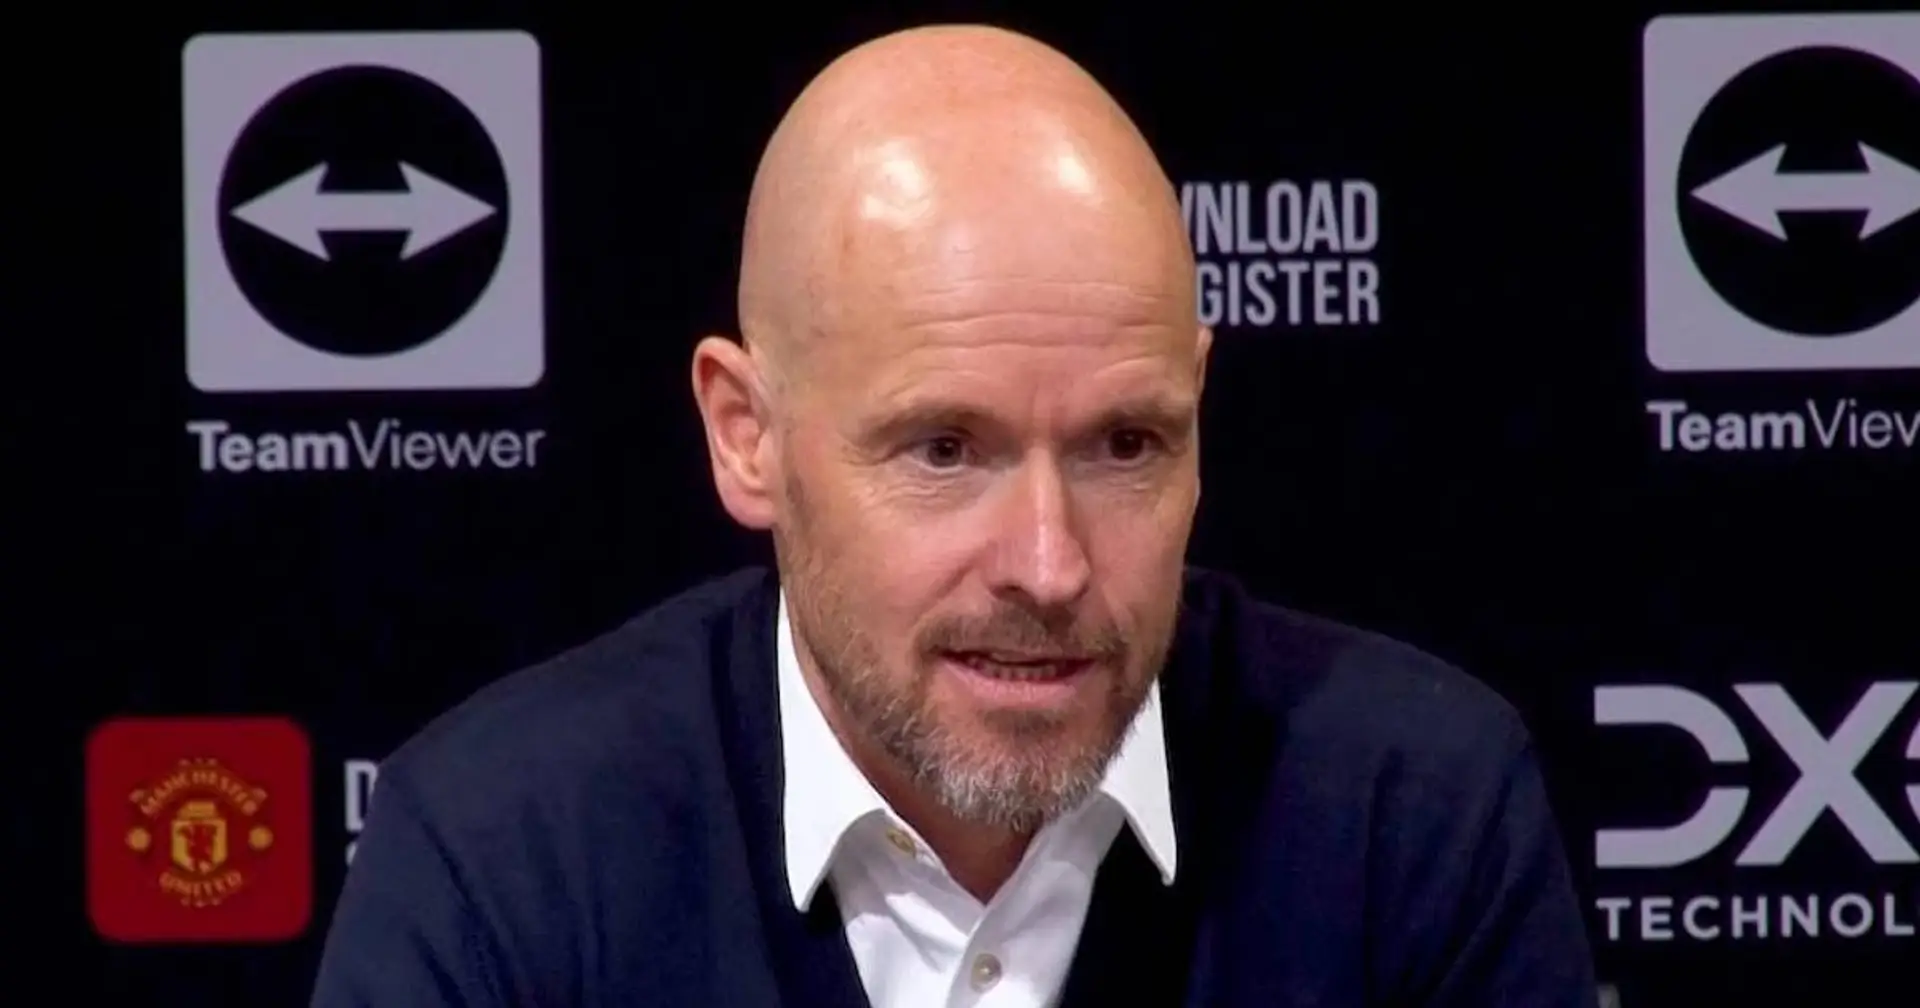 Ten Hag on Sancho deleting his Instagram: 'I don't talk about unavailable players' 